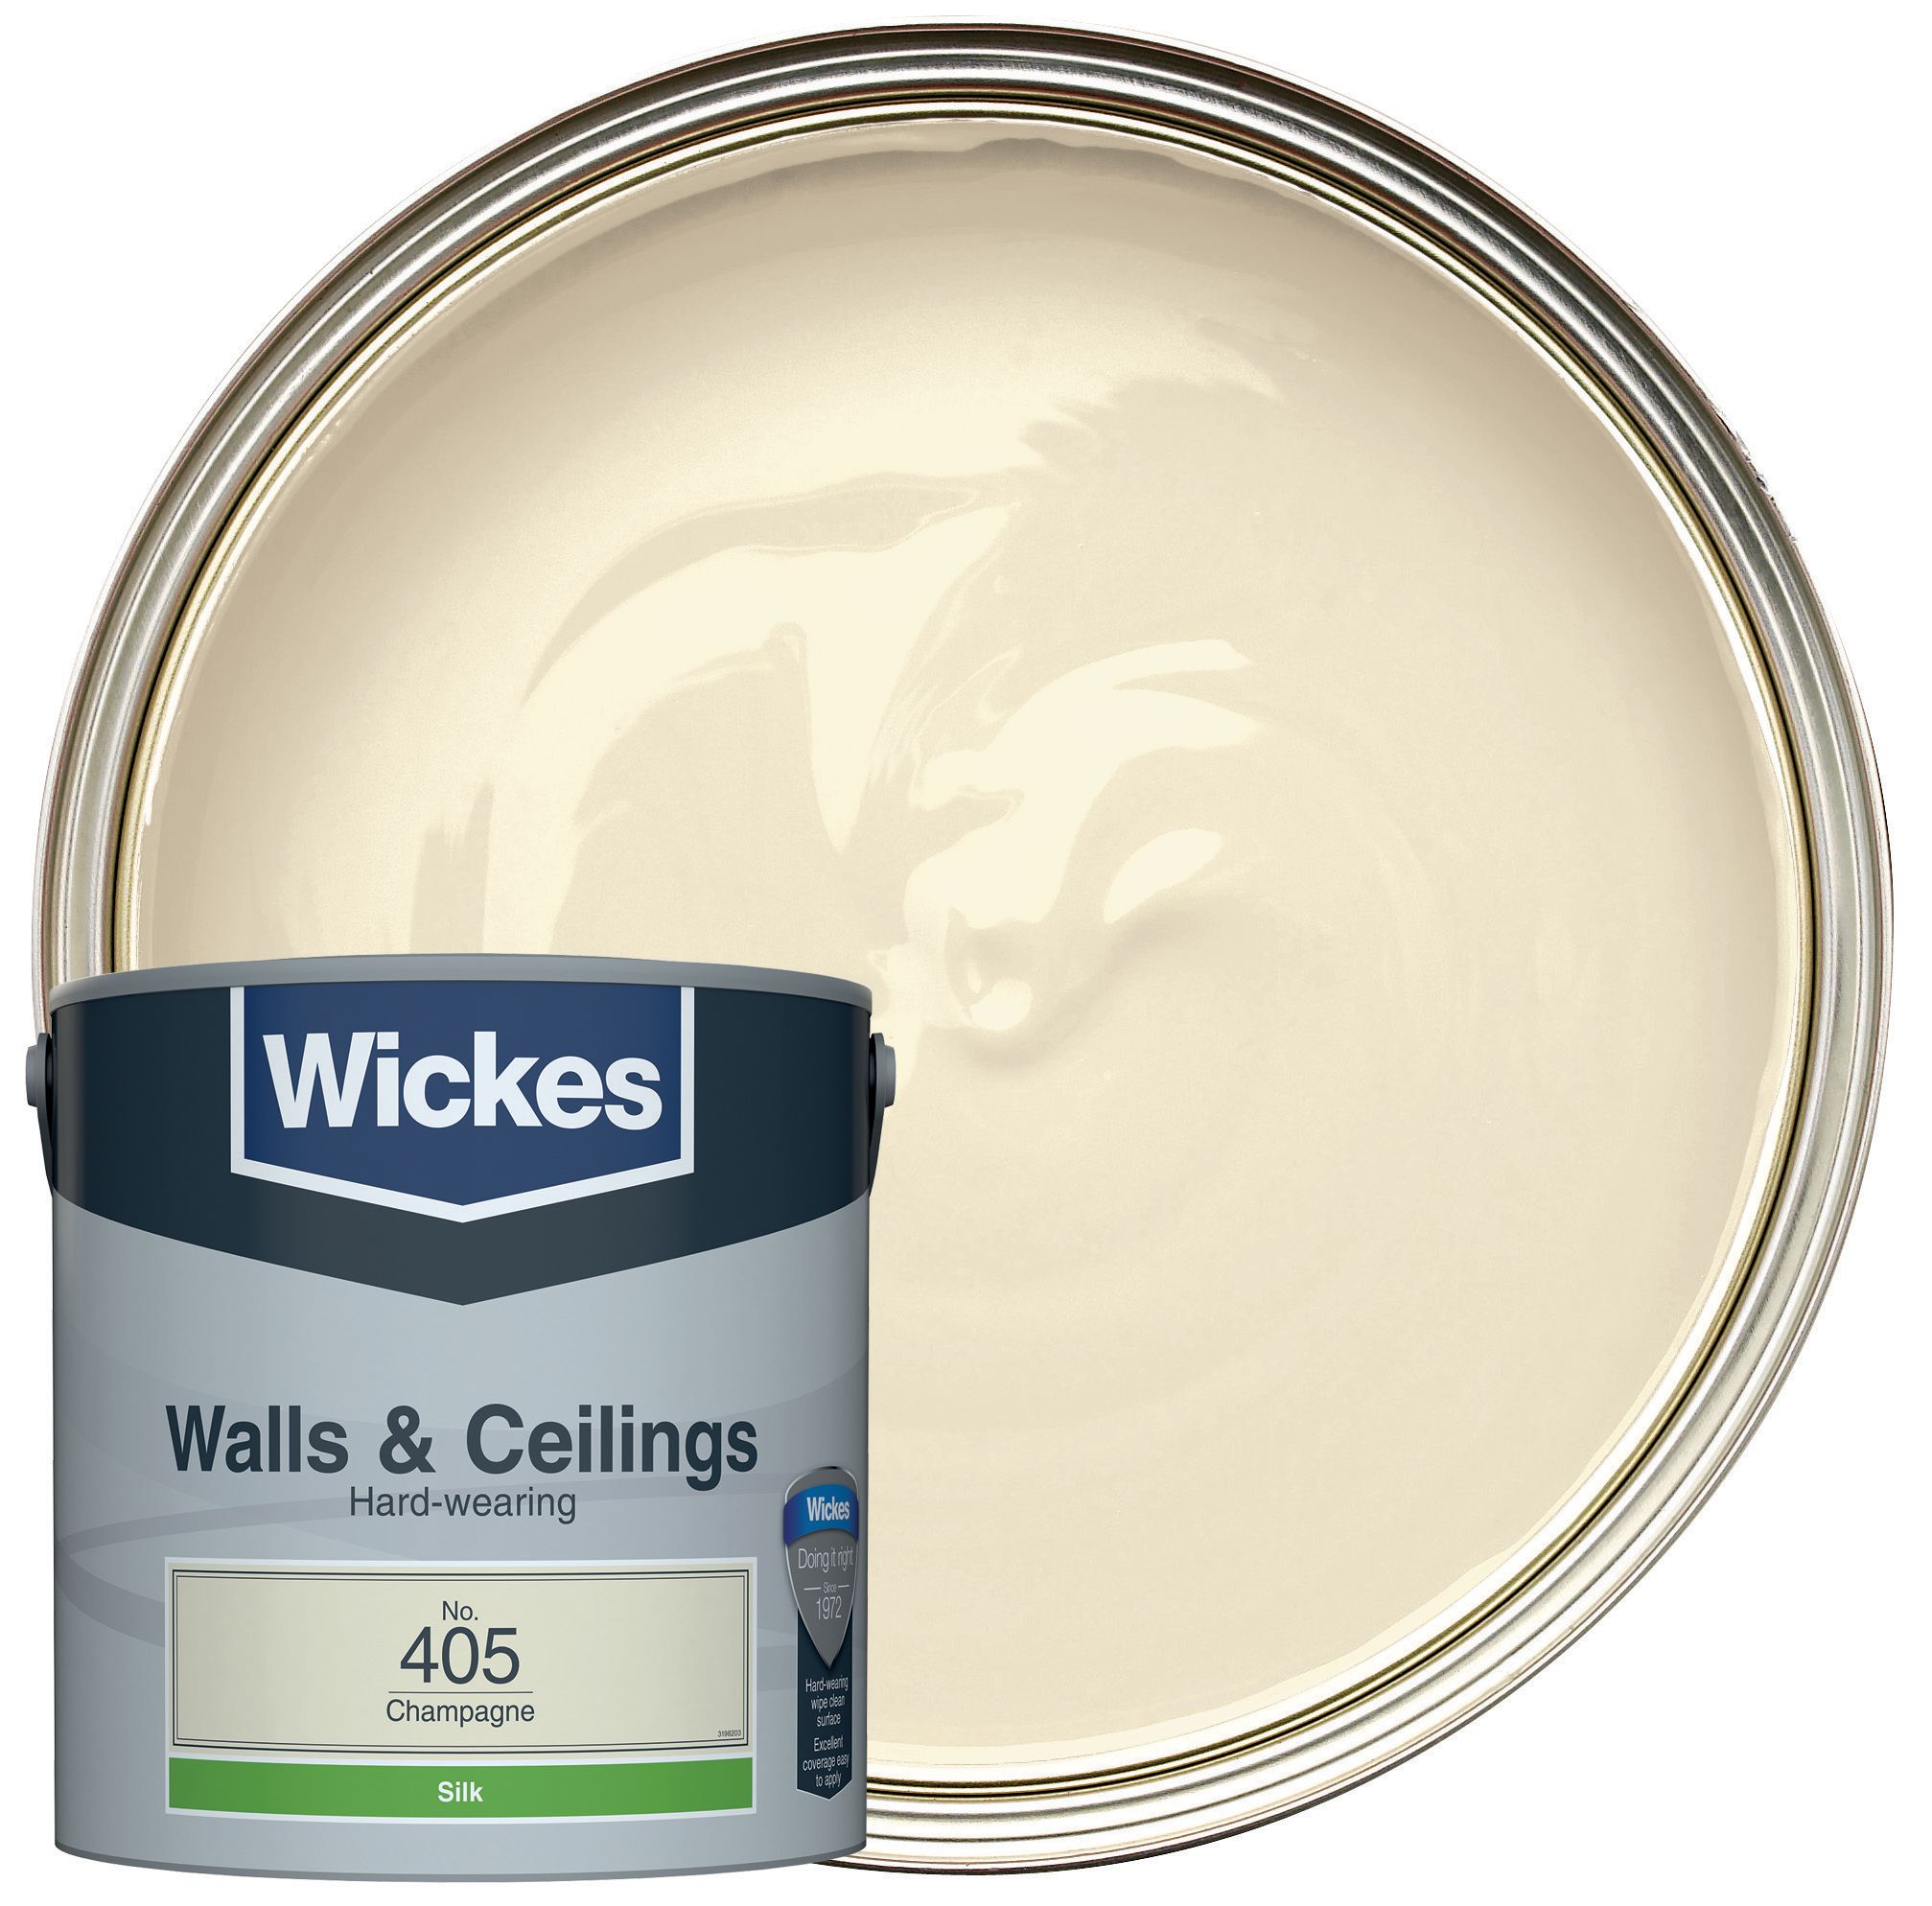 Image of Wickes Vinyl Silk Emulsion Paint - Champagne No.405 - 2.5L